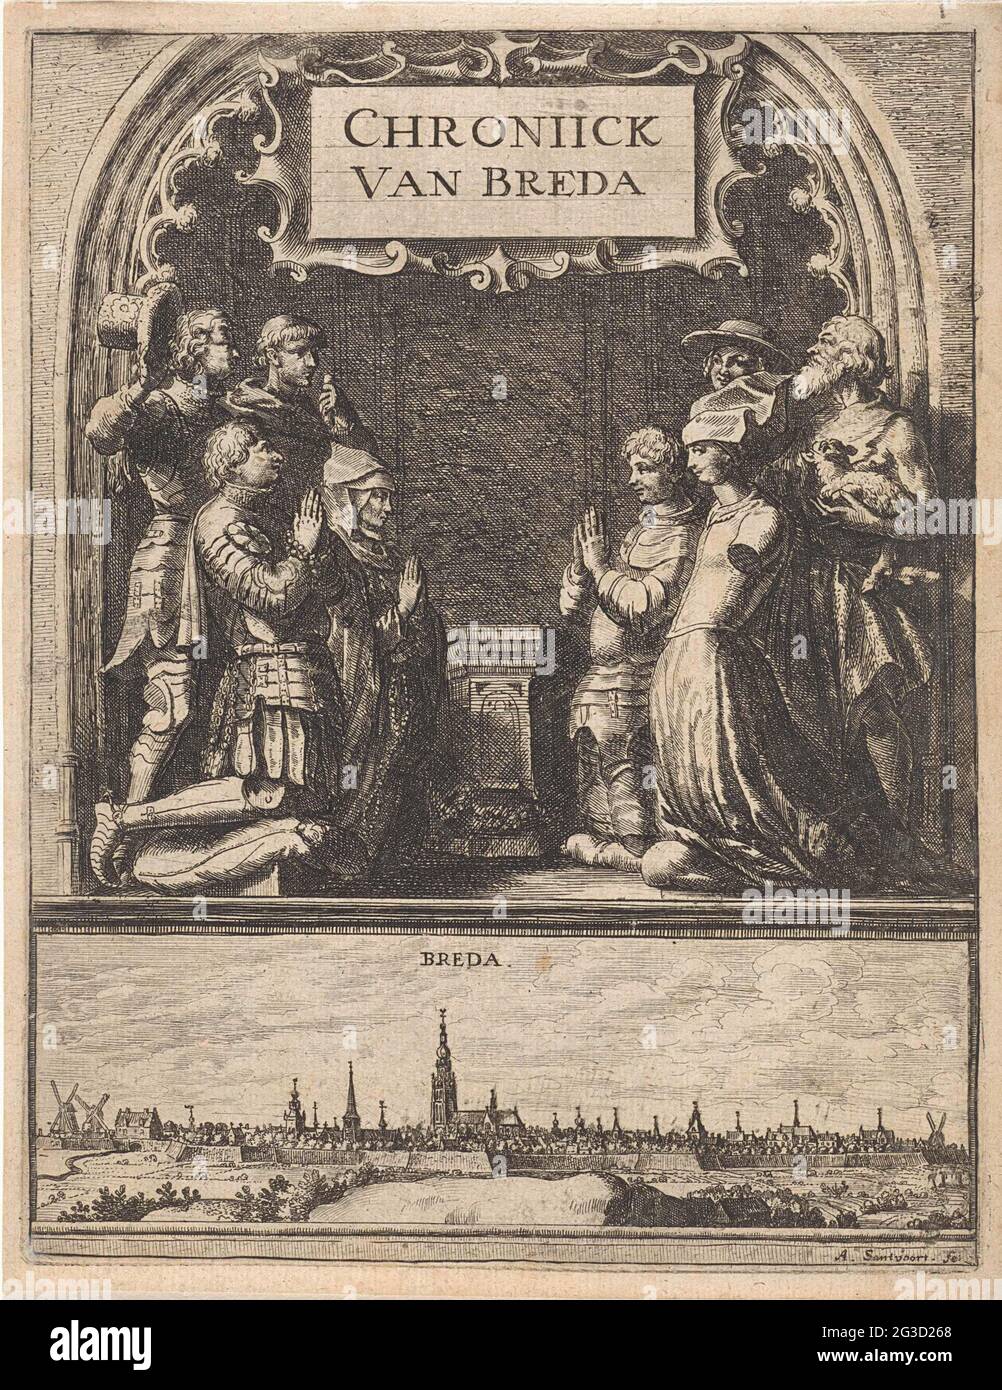 Praying persons at a niche; Title page for: Vliet, Johannes van. Bredaesche Almanac, and Chronijck, 1664. Some people in and for a niche of a church. On the left is a man in armor, who decreases his hat with floral motifs, next to a young man in a piping. Does the donors kneel (?) With folded hands; A man in armor and a woman with cloak and hood. Opposite them kneels a praying man in armor. Next to him a kneeling woman in a simple dress. She wears a hood and her left arm is largely cut. Behind her is a man, John the Baptist (?), With a lamb on his arm. Next to him a man with a cardinal hat. Be Stock Photo